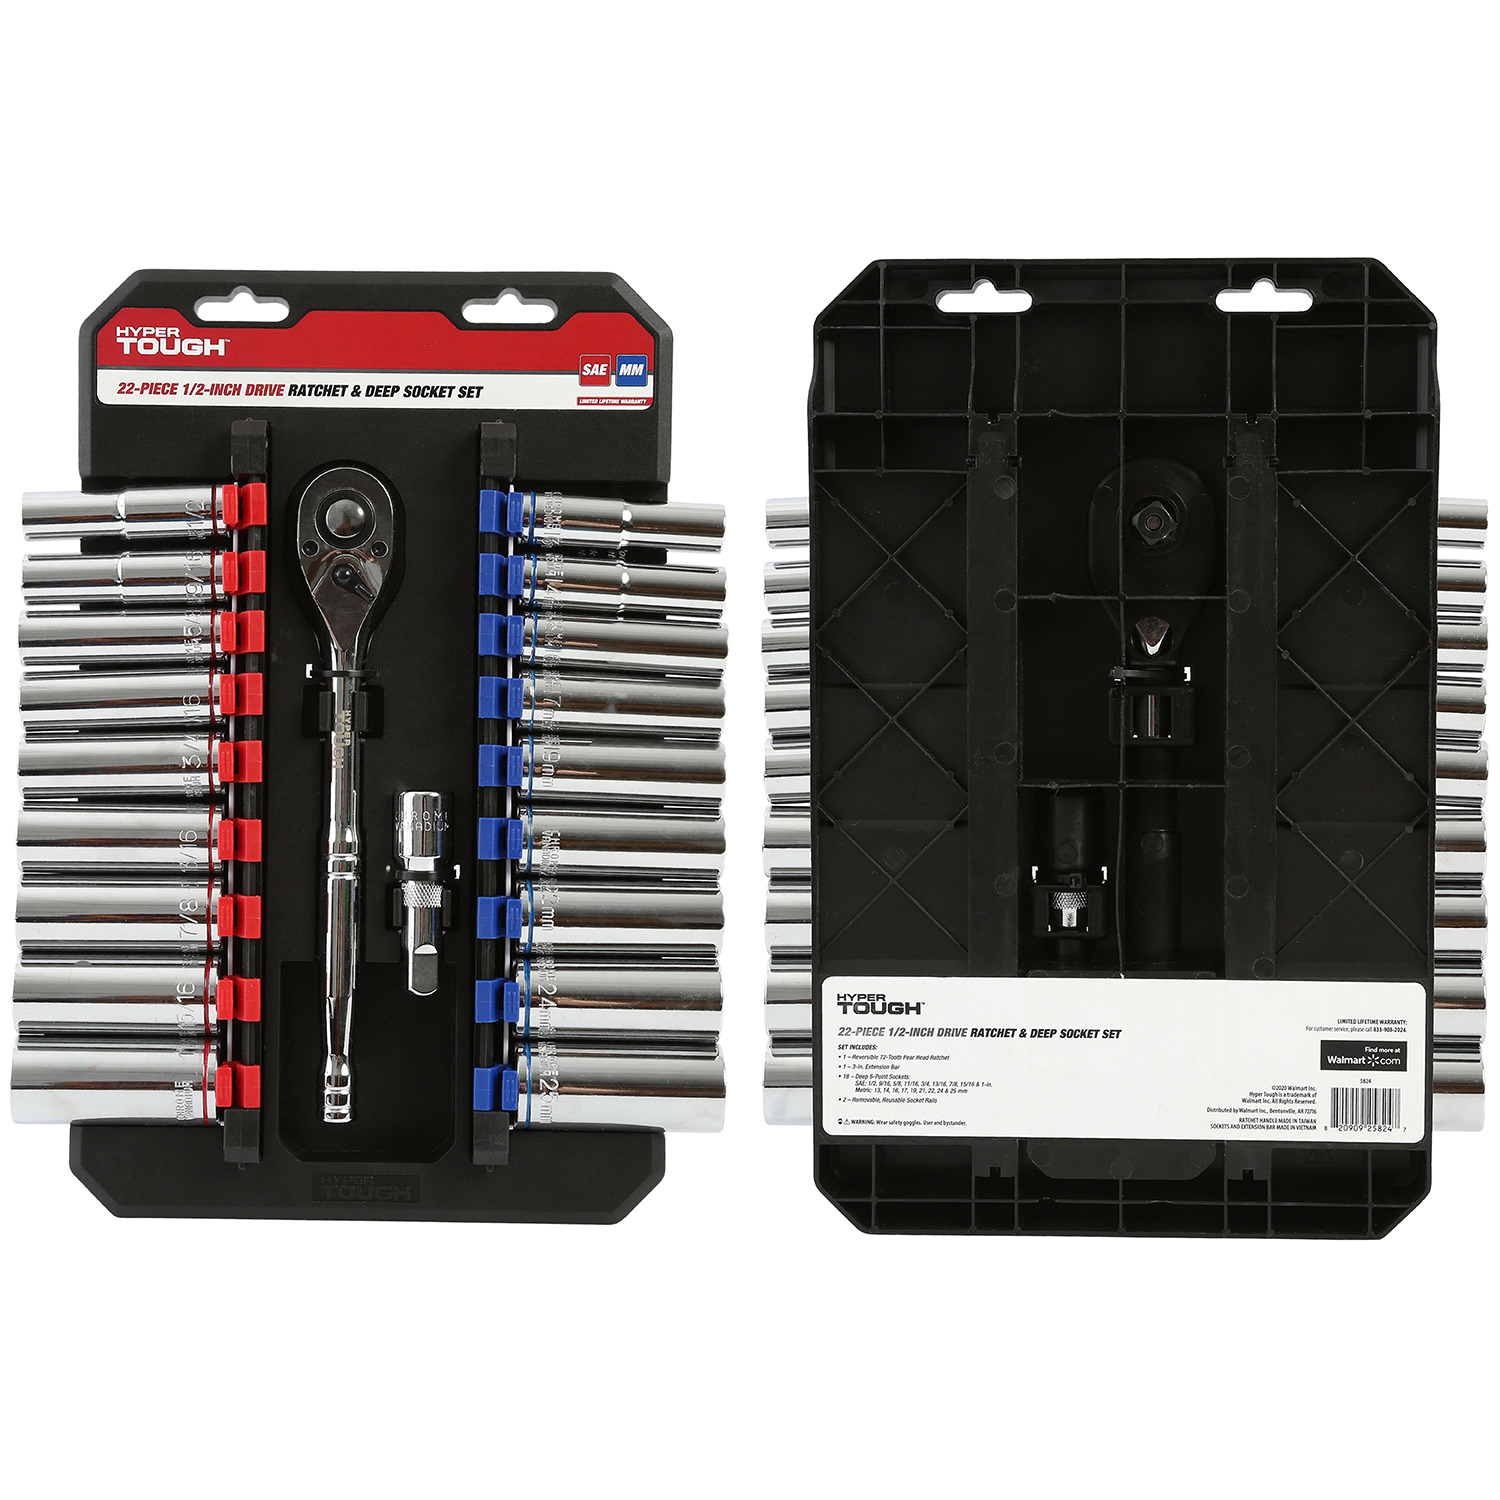 Hyper Tough 22-Piece 1/2-inch Drive Ratchet and Deep Socket SAE and Metric  Set